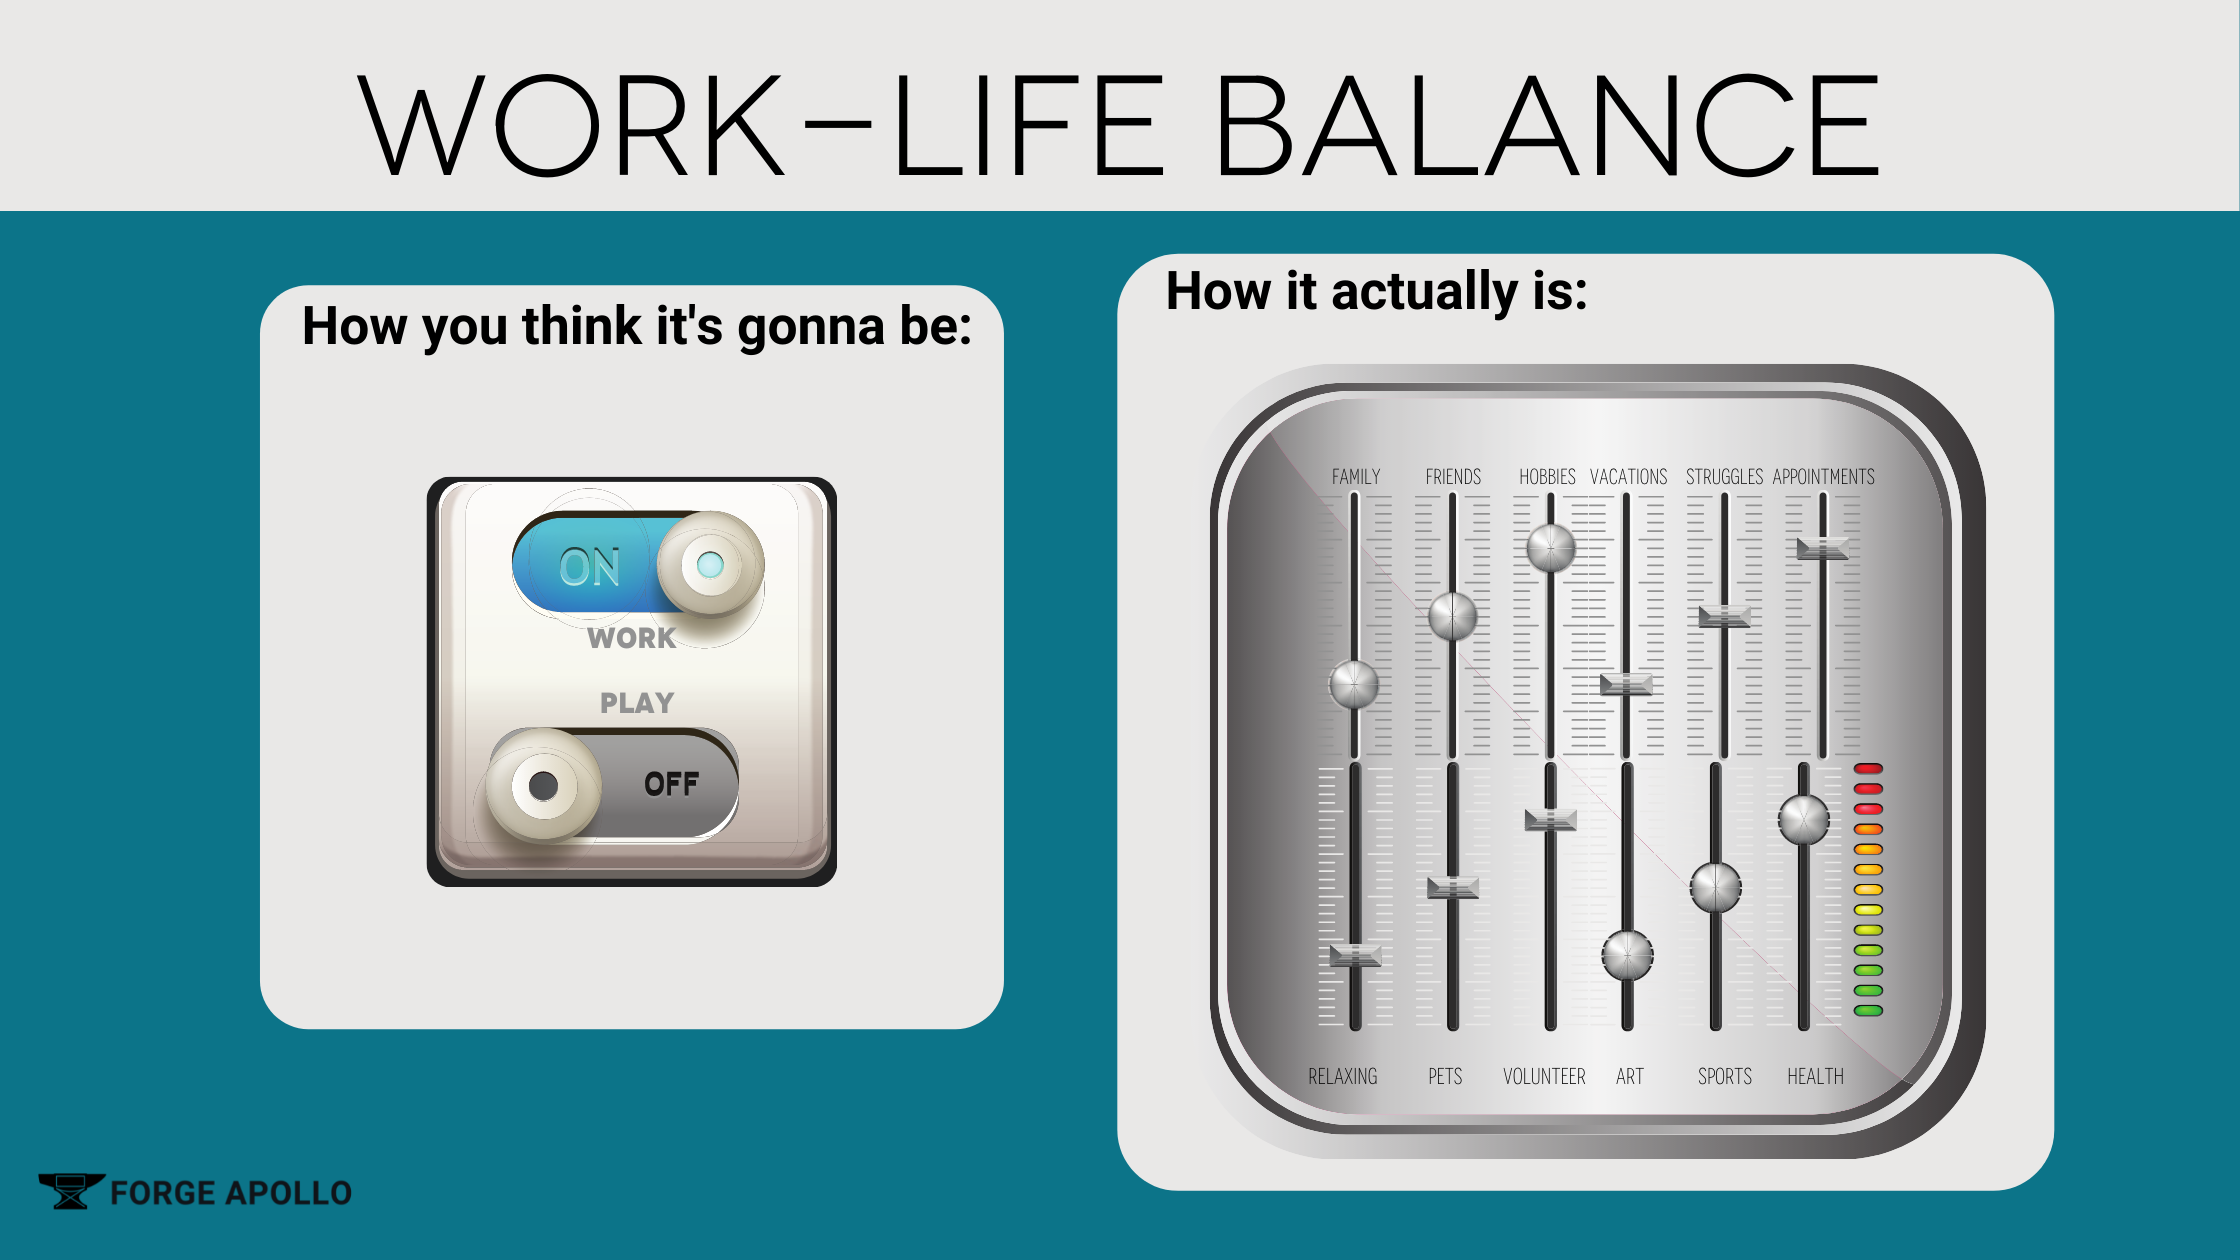 Work-life balance graphic depicting that balance is harder to achieve than one would think